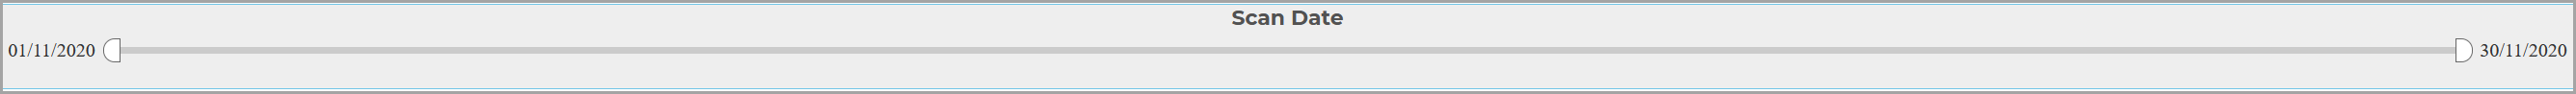 Scan_Date.png